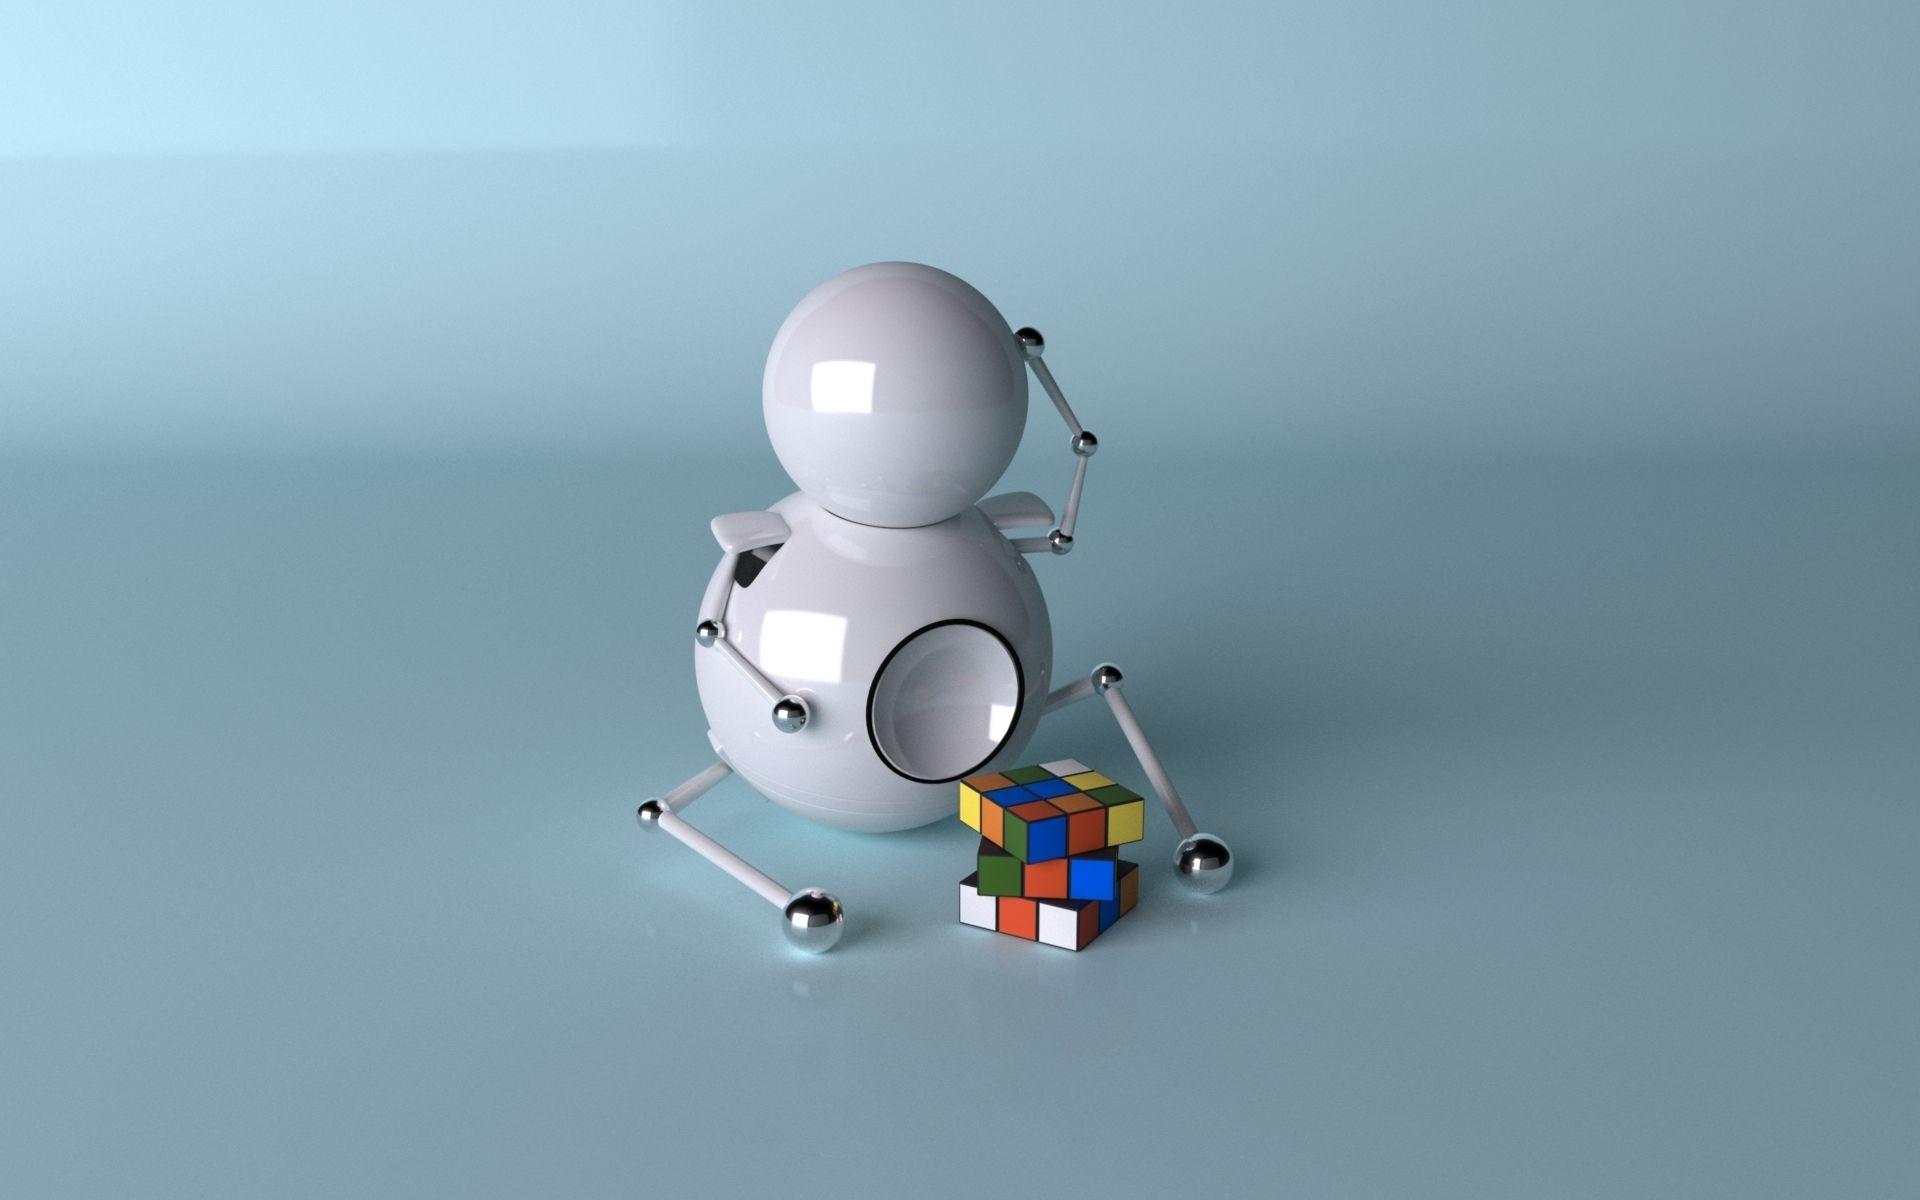 The robot and the Rubik's cube wallpaper and image